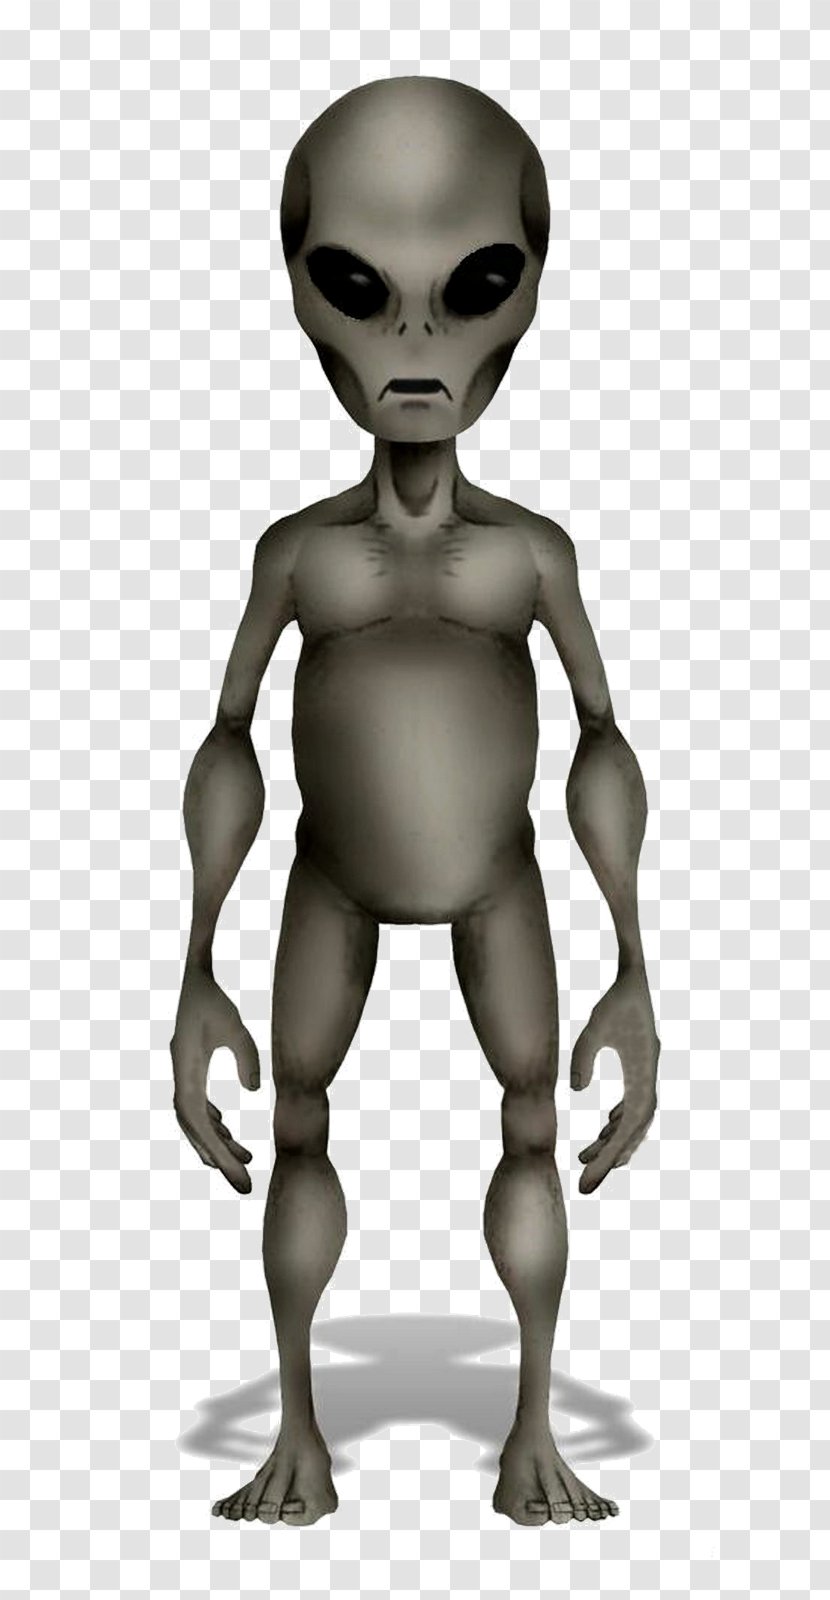 Extraterrestrial Life Grey Alien Abduction Unidentified Flying Object Extraterrestrials In Fiction - Cartoon Transparent PNG